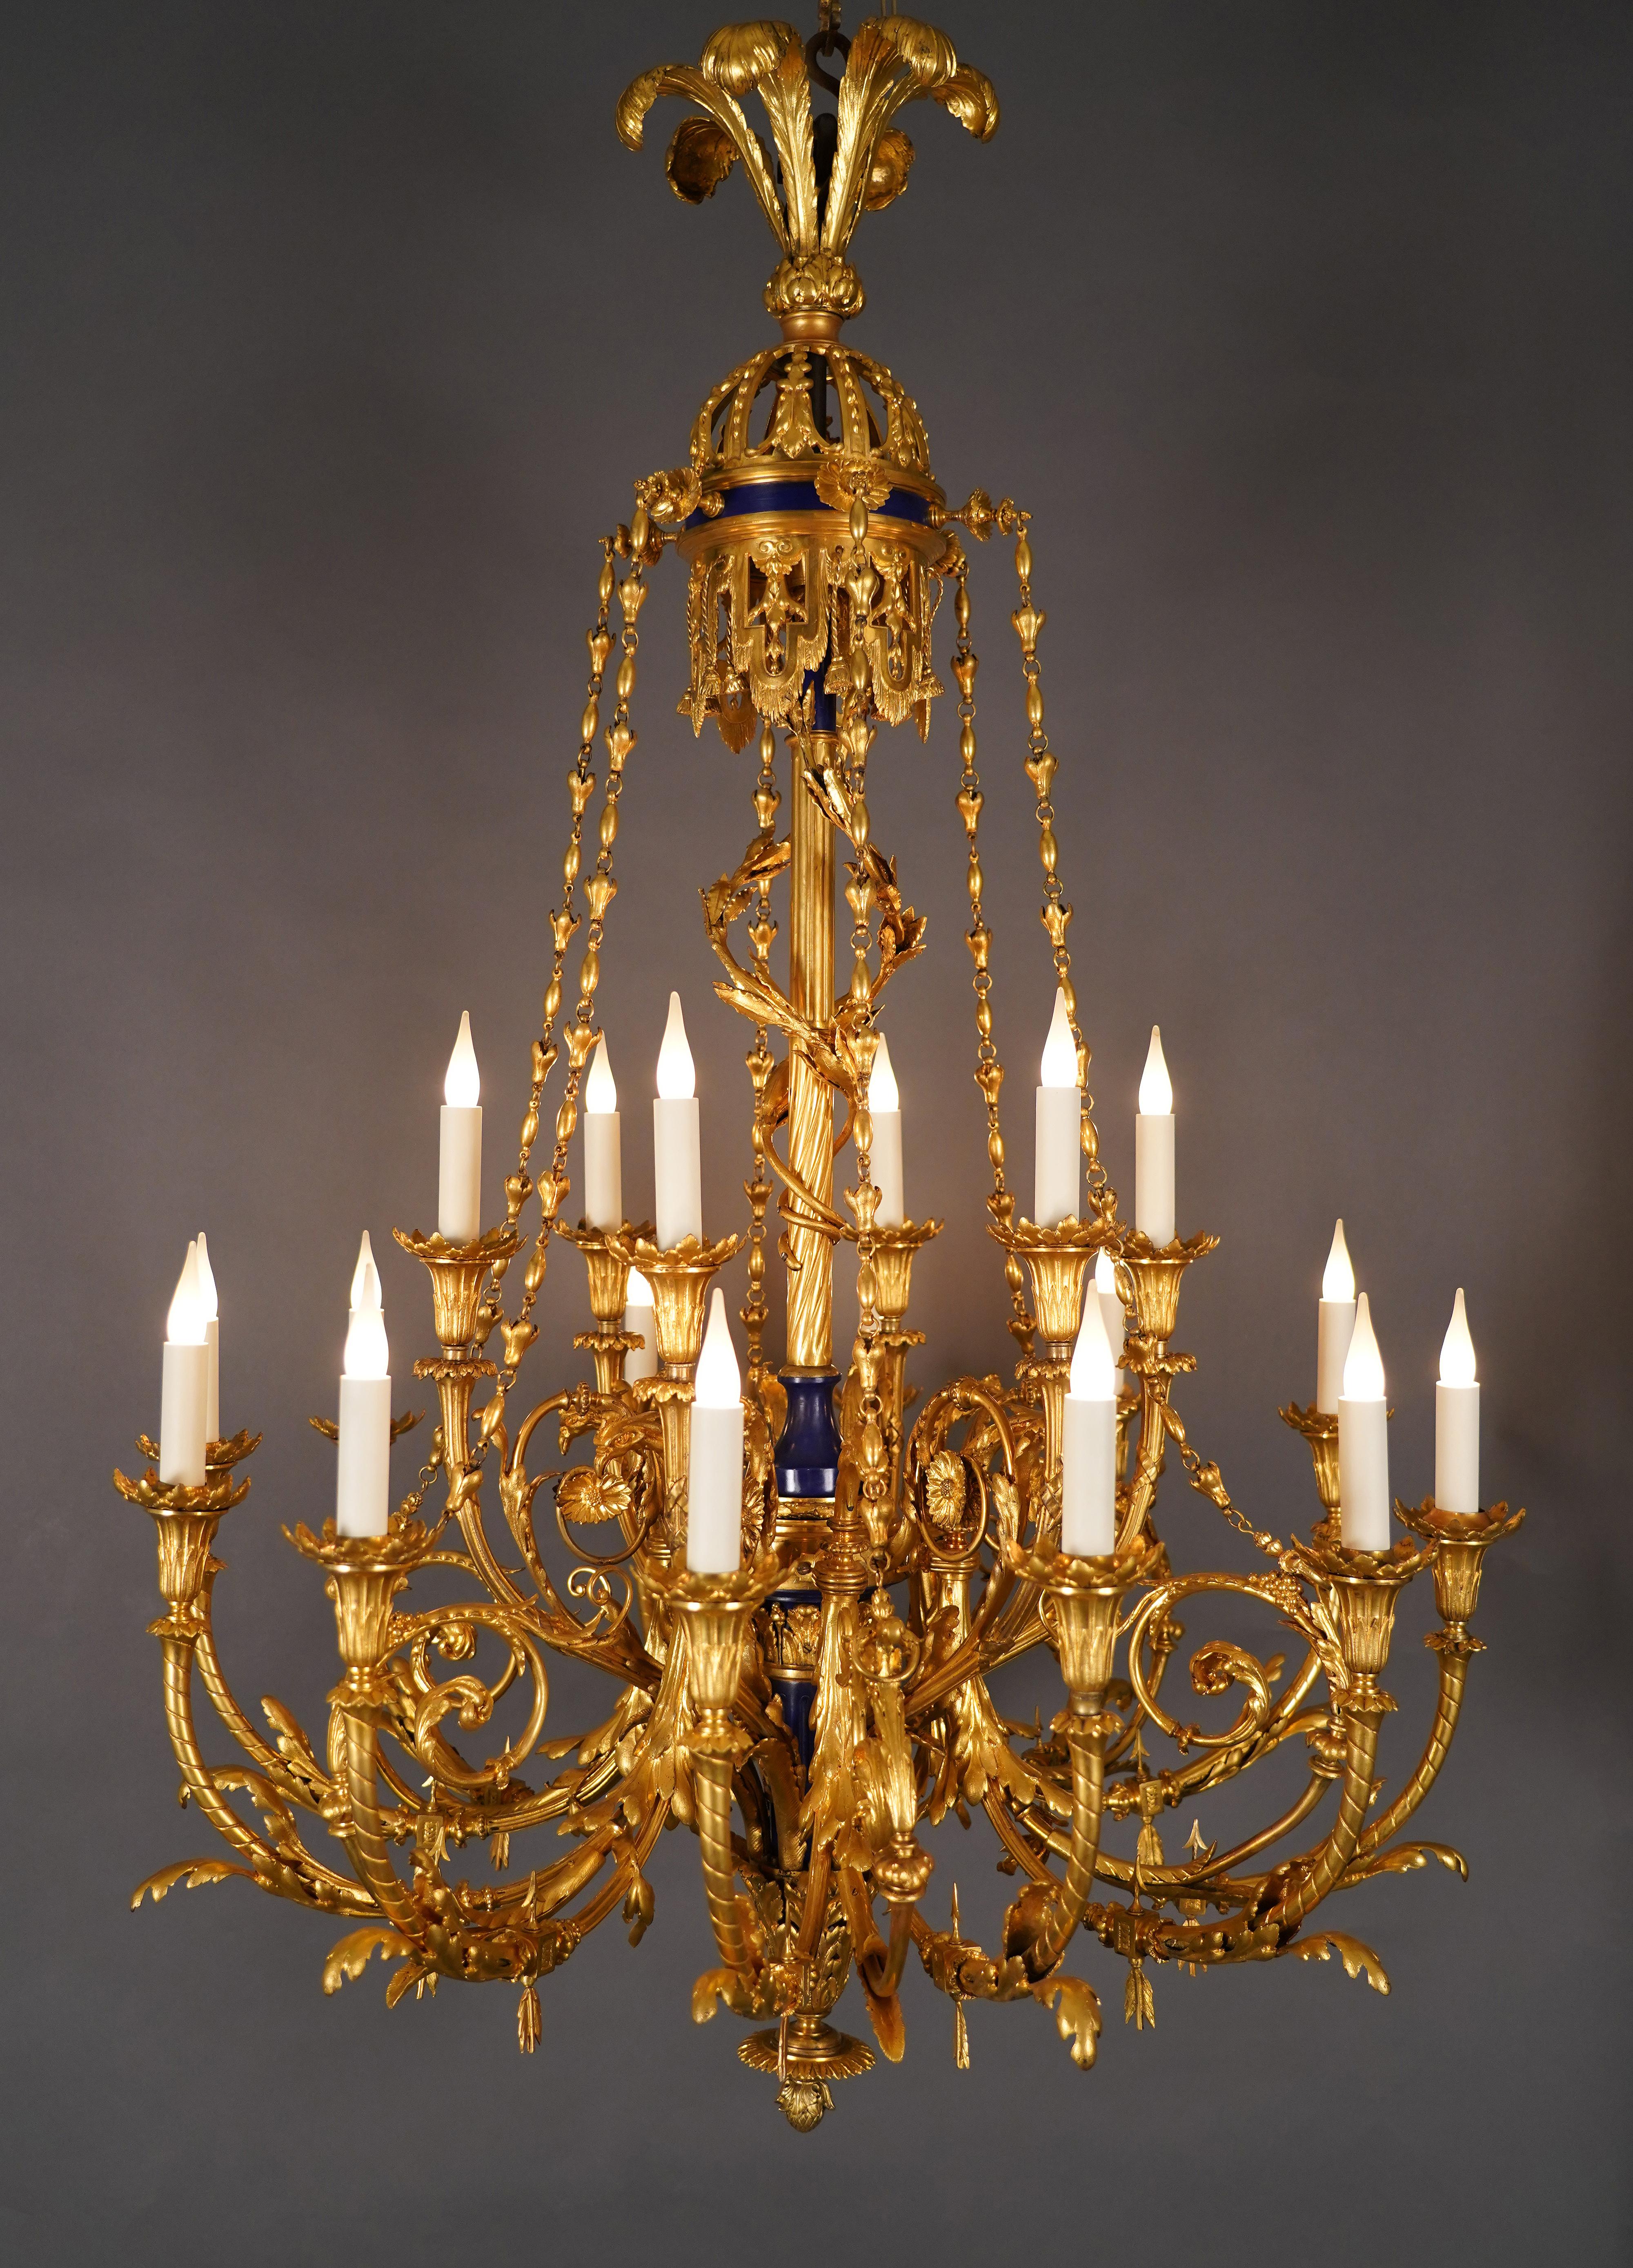 Important Louis XVI-inspired chandelier in gilded bronze with 18 lights. The central shaft is made up of a baluster-shaped dark blue cold-painted vase, surmounted by a fluted rod in gilded bronze surrounded by intertwined laurel branches, topped